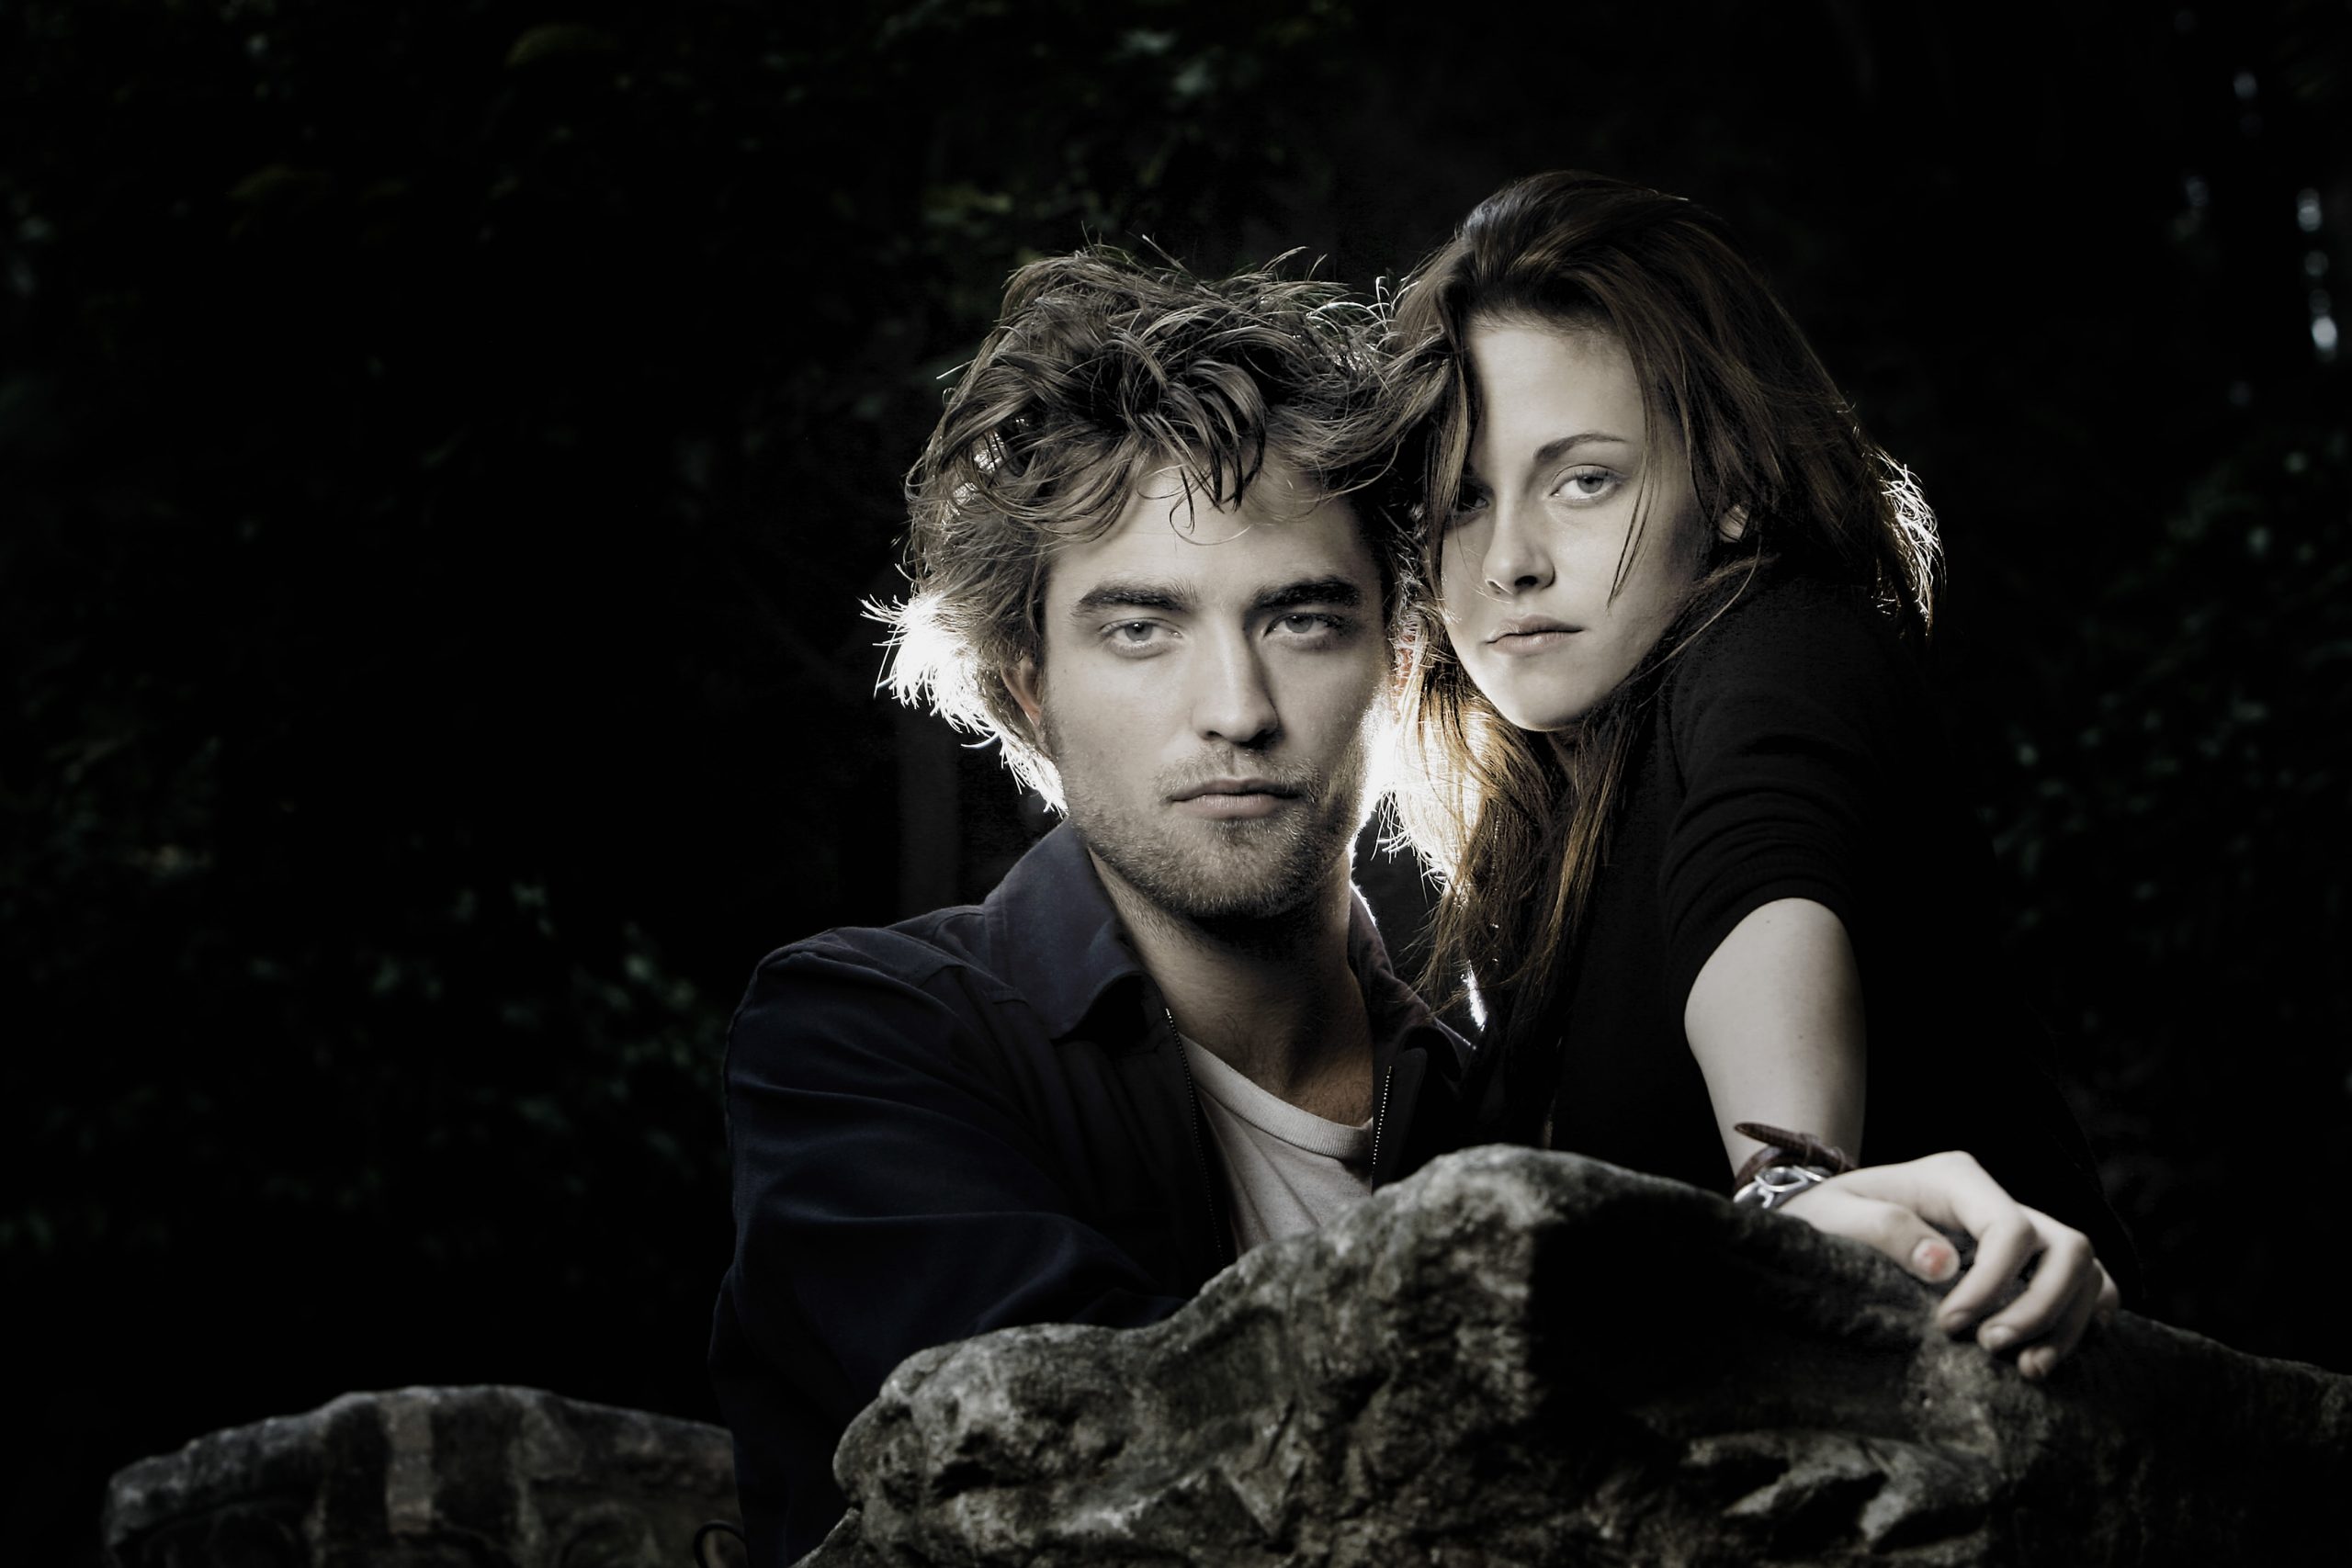 Robert Pattinson and Kristen Stewart pose for the 'Twilight' Portrait Session during the 3rd Rome International Film Festival on October 31, 2008 in Rome, Italy.